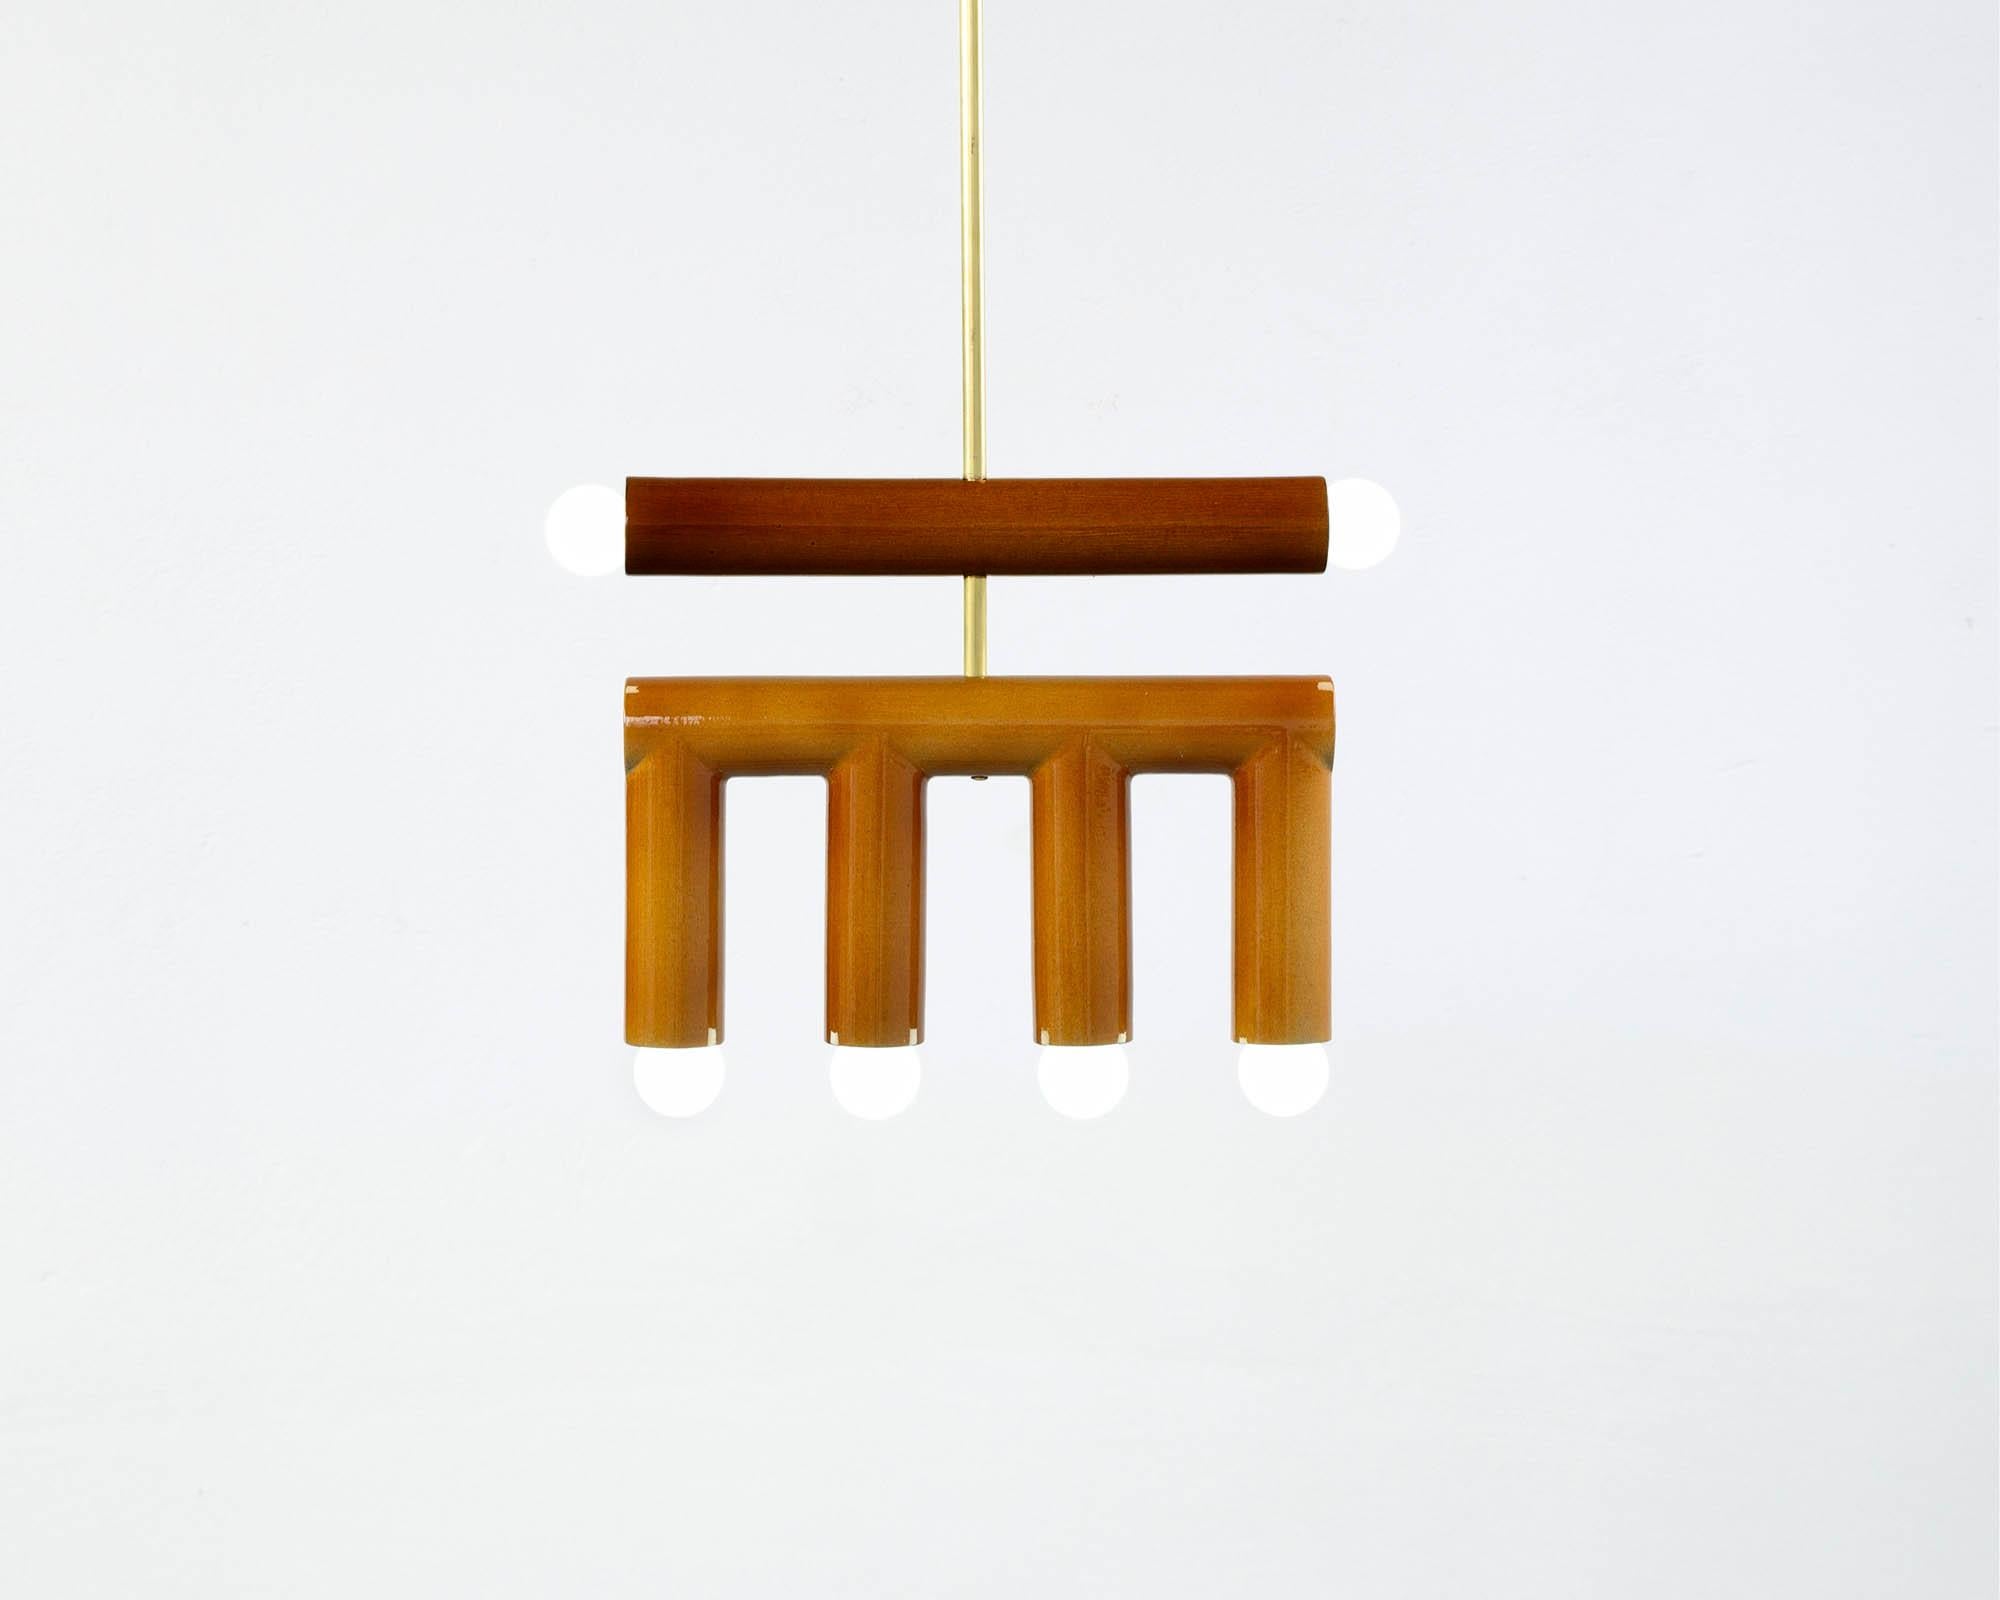 TRN D2 Pendant lamp / ceiling lamp / chandelier 
Designer: Pani Jurek

Dimensions: H. 28 x 35 x 5 cm
Model shown: Brown and ochre

Bulb (not included): E27/E26, compatible with US electric system
_________________________________

Pani Jurek is a